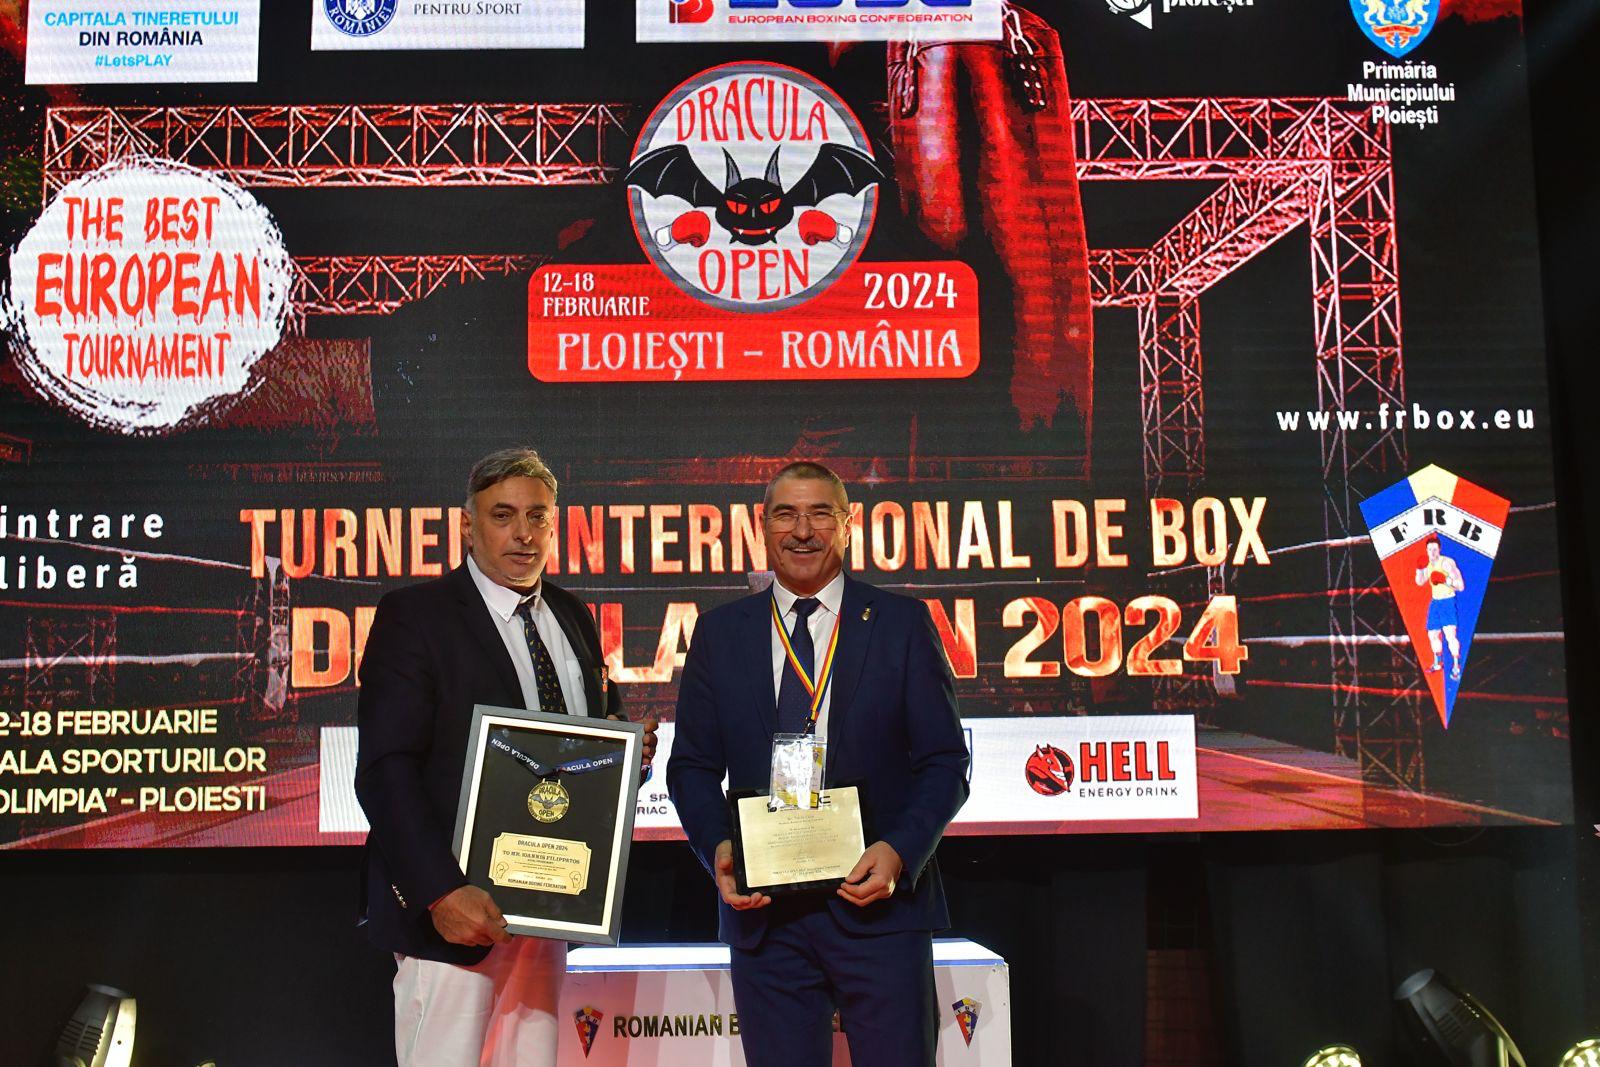 Ukraine won 4 finals with Uzbekistan and secure the award of Best Team of Dracula Open